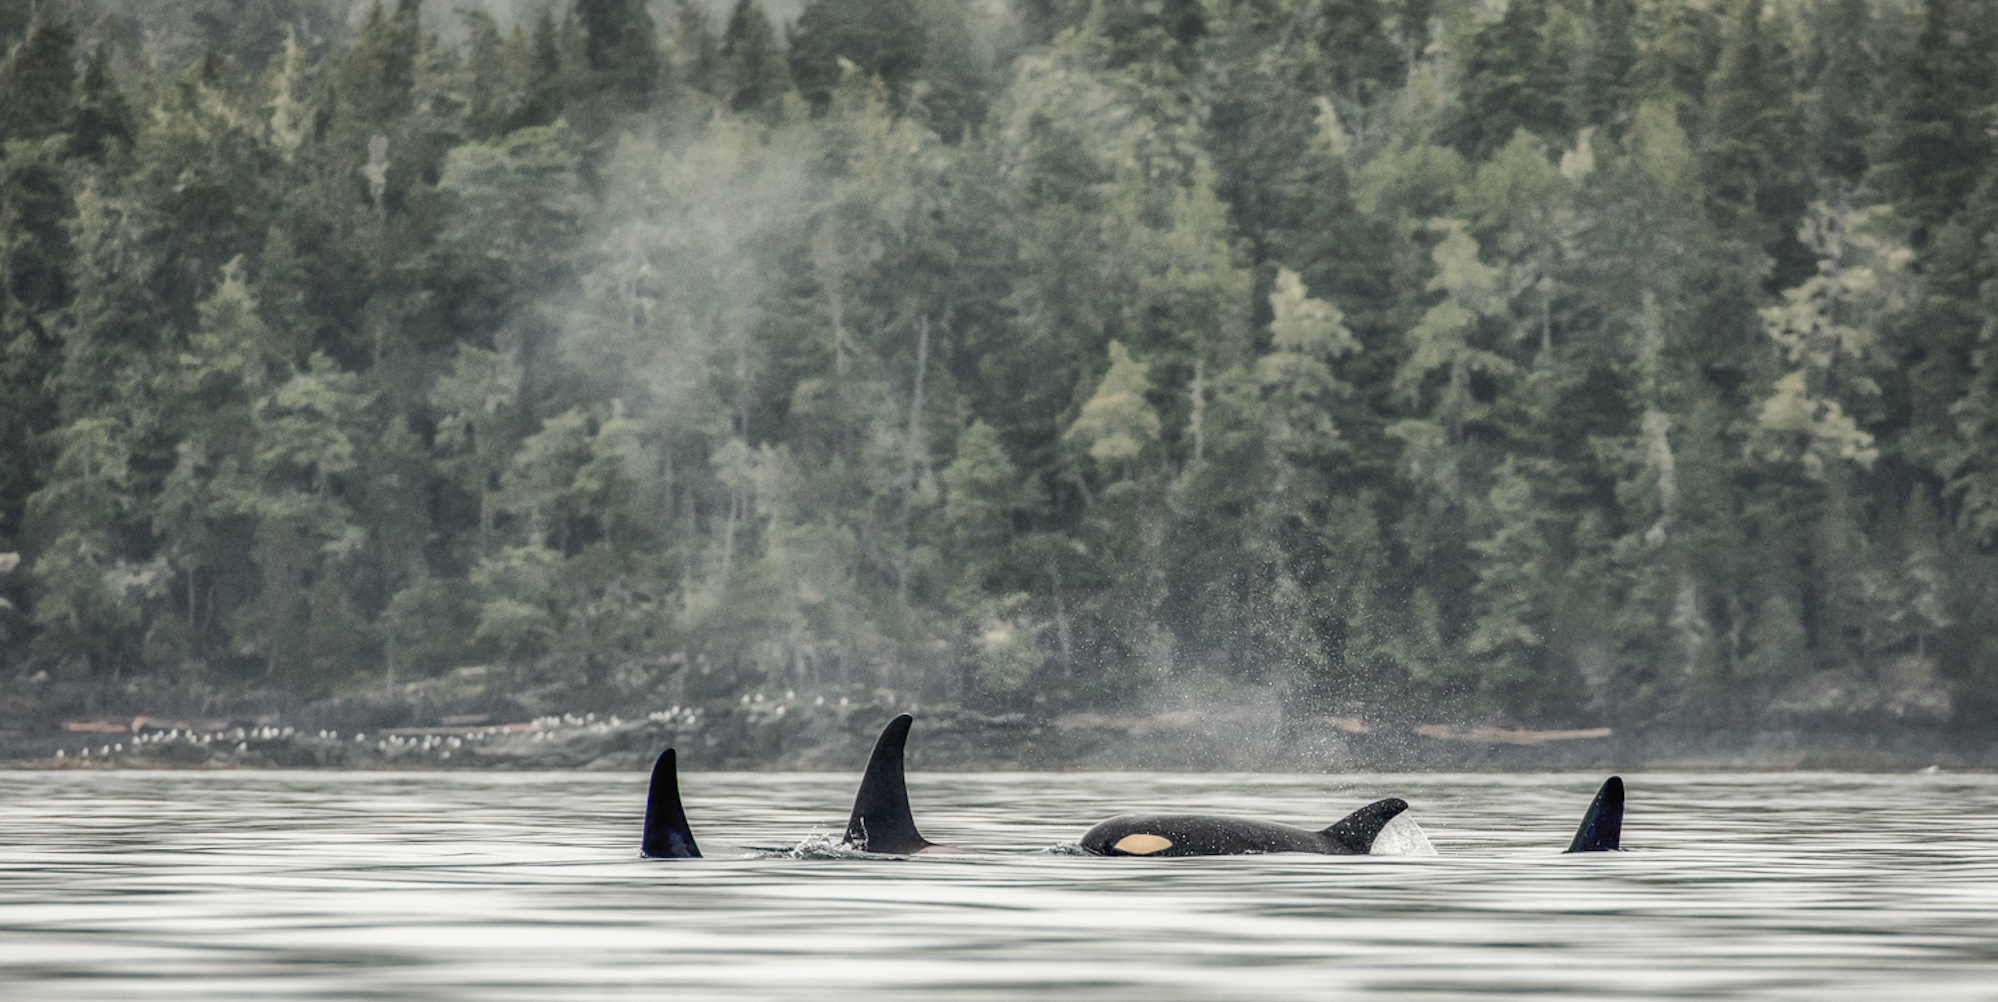 Orca whales swimming in a pod on a misty morning off the coast of Vancouver Island, British Columbia